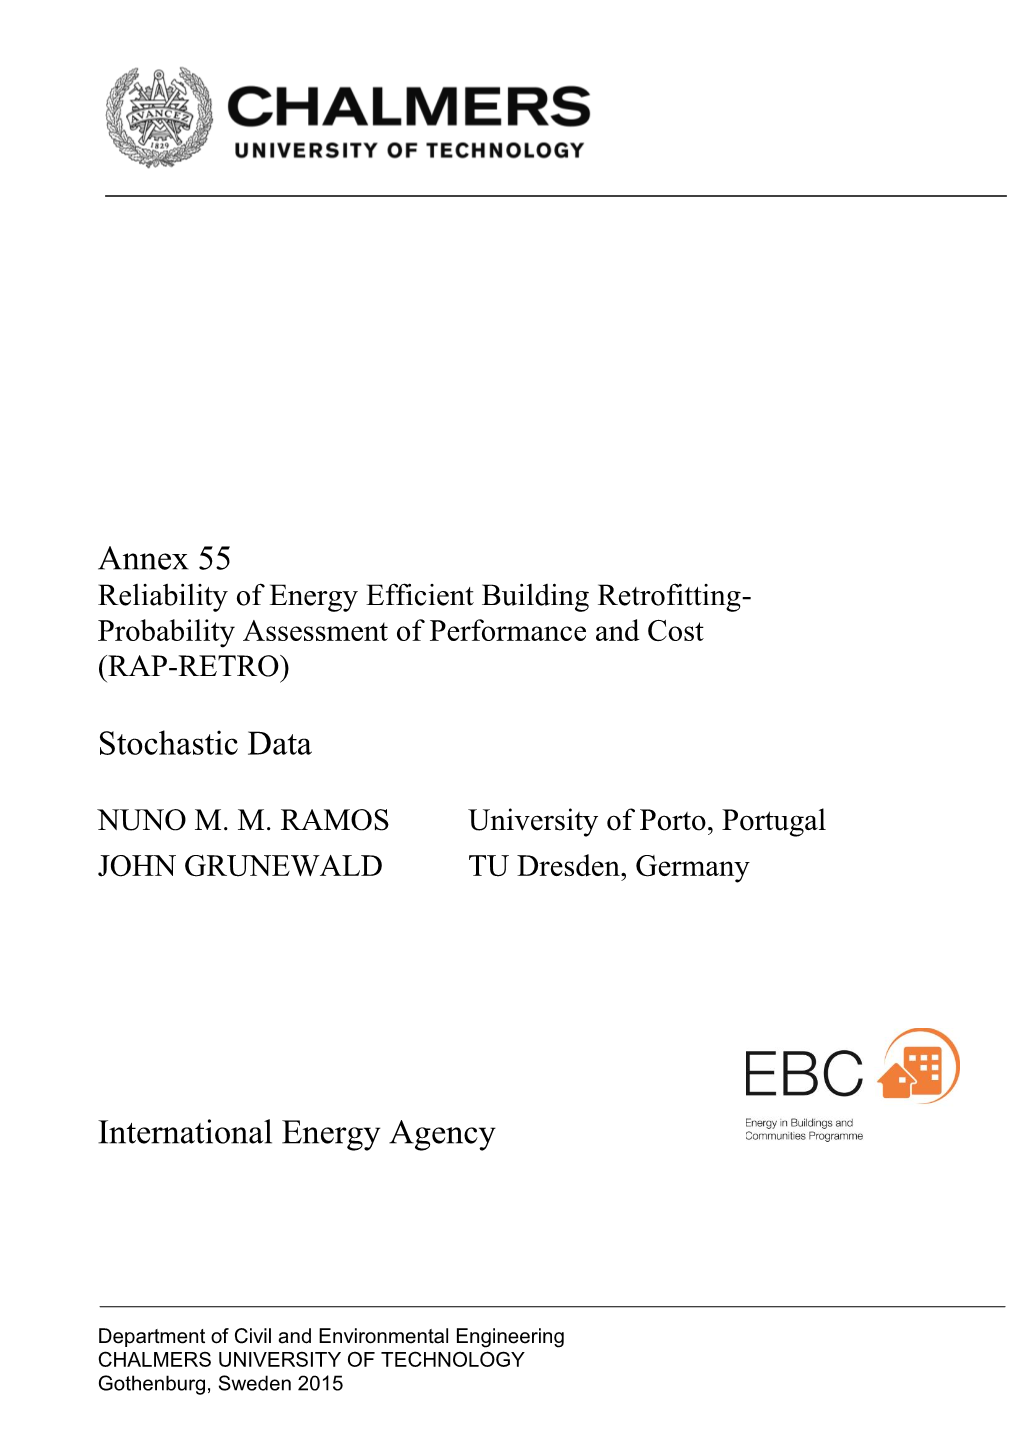 Annex 55, Reliability of Energy Efficient Building Retrofitting-Probability Assessment of Performance and Cost(RAP-RETRO)